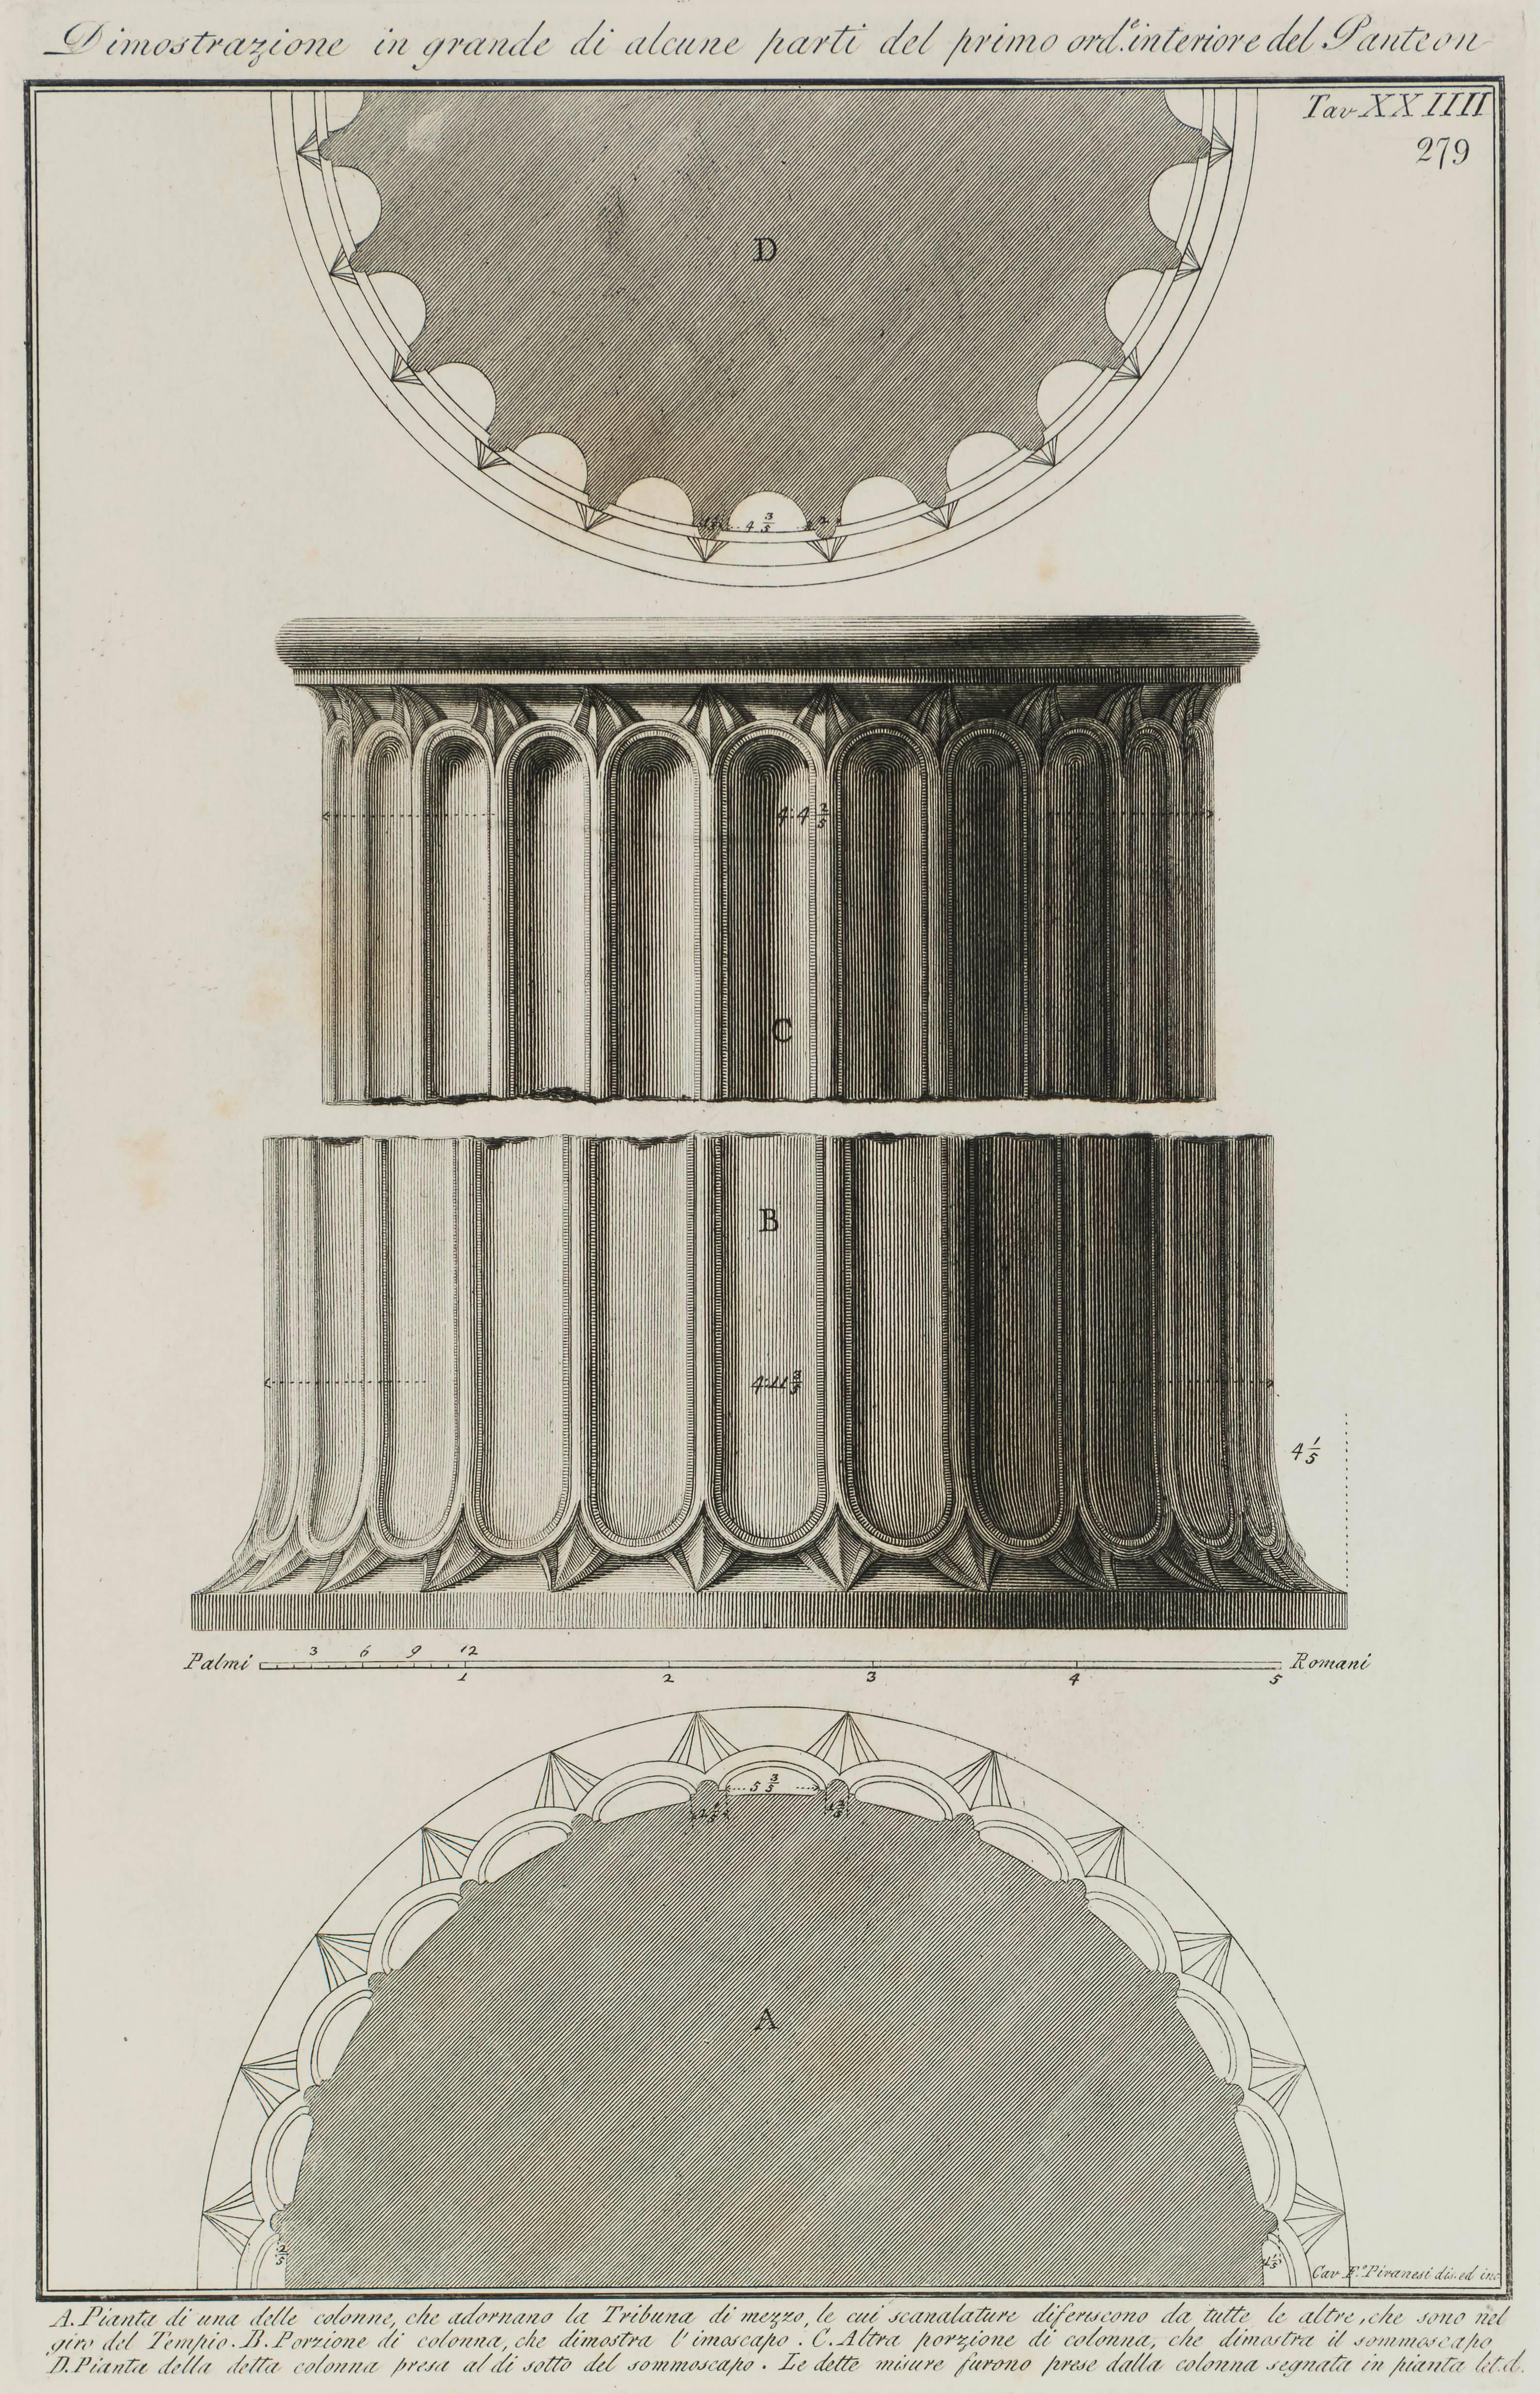 Doric Columns of the Pantheon in Rome